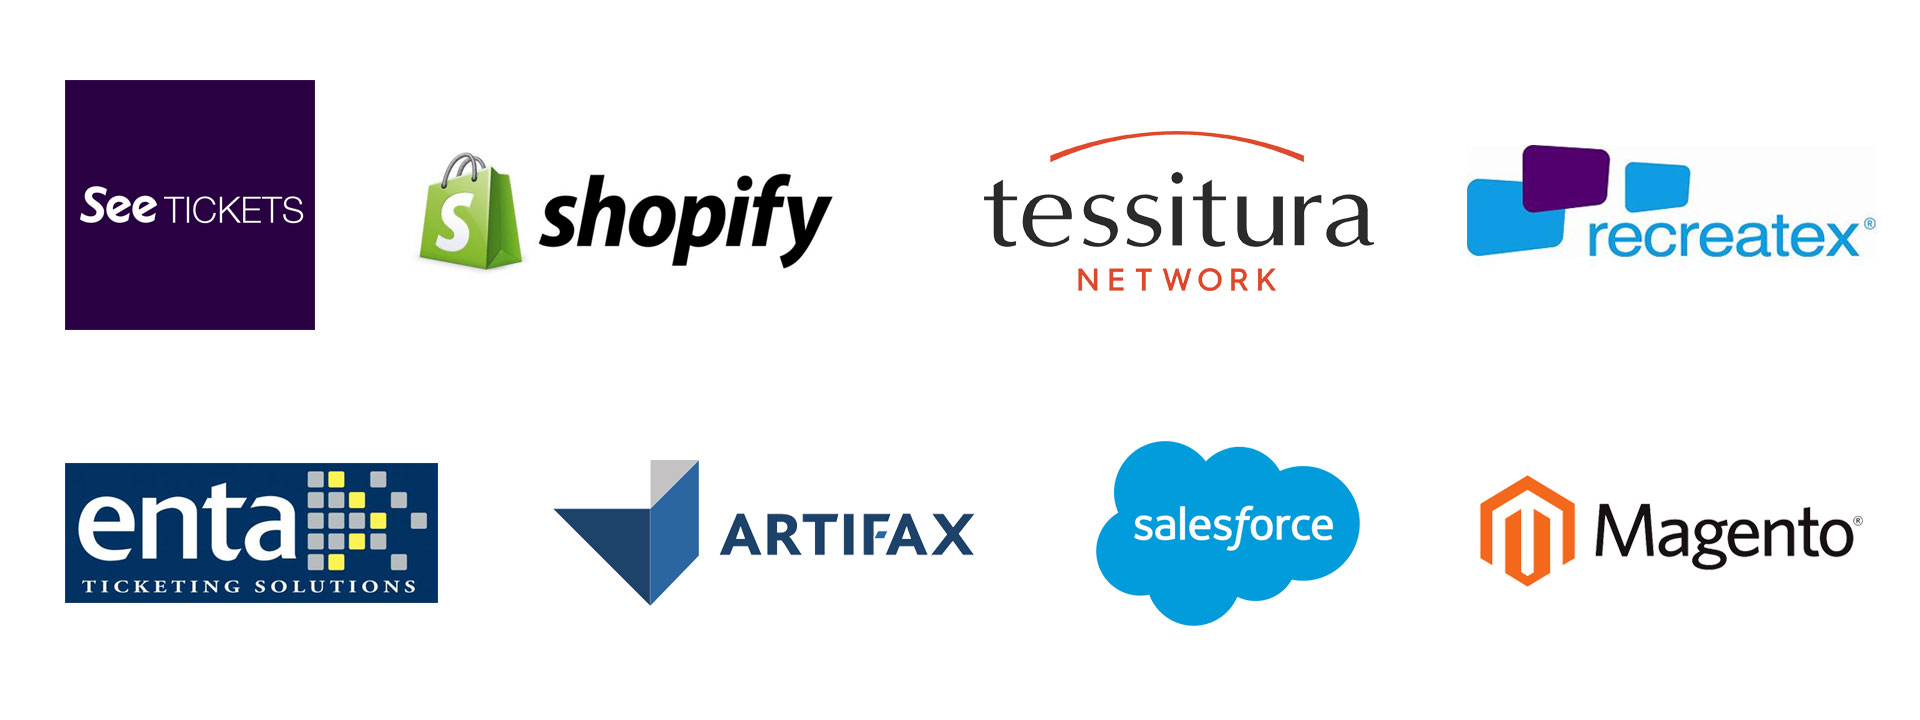 See Tickets, Shopify, Tessitura Network, Recreatex, Entra Ticketing Solutions, Artifax, Salesforce and Magento logos